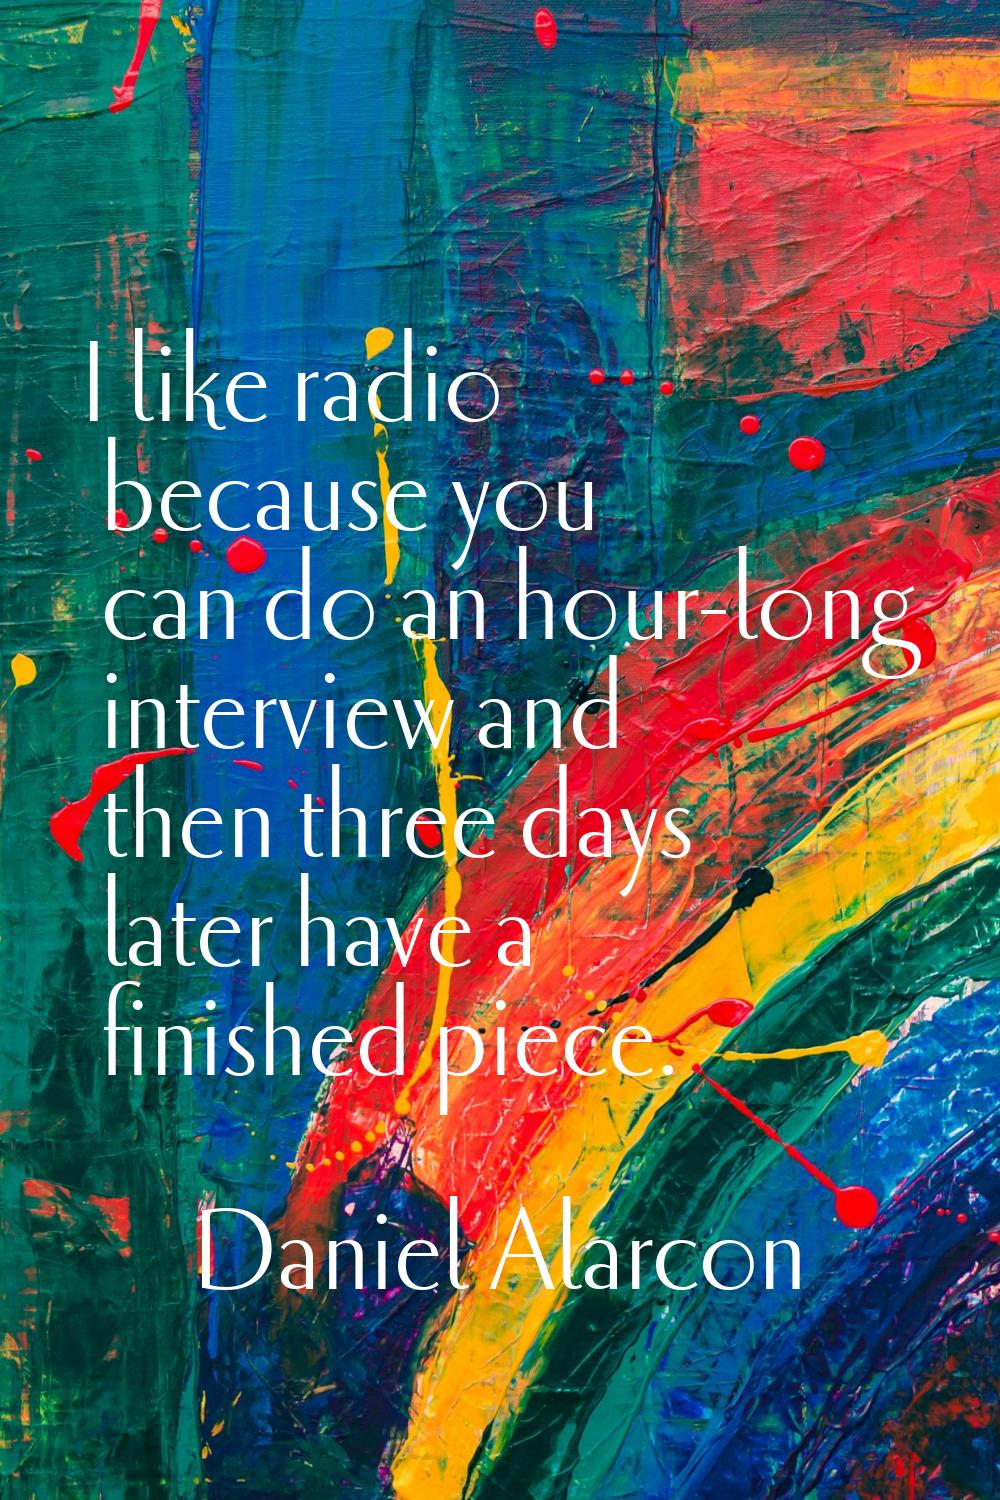 I like radio because you can do an hour-long interview and then three days later have a finished pi